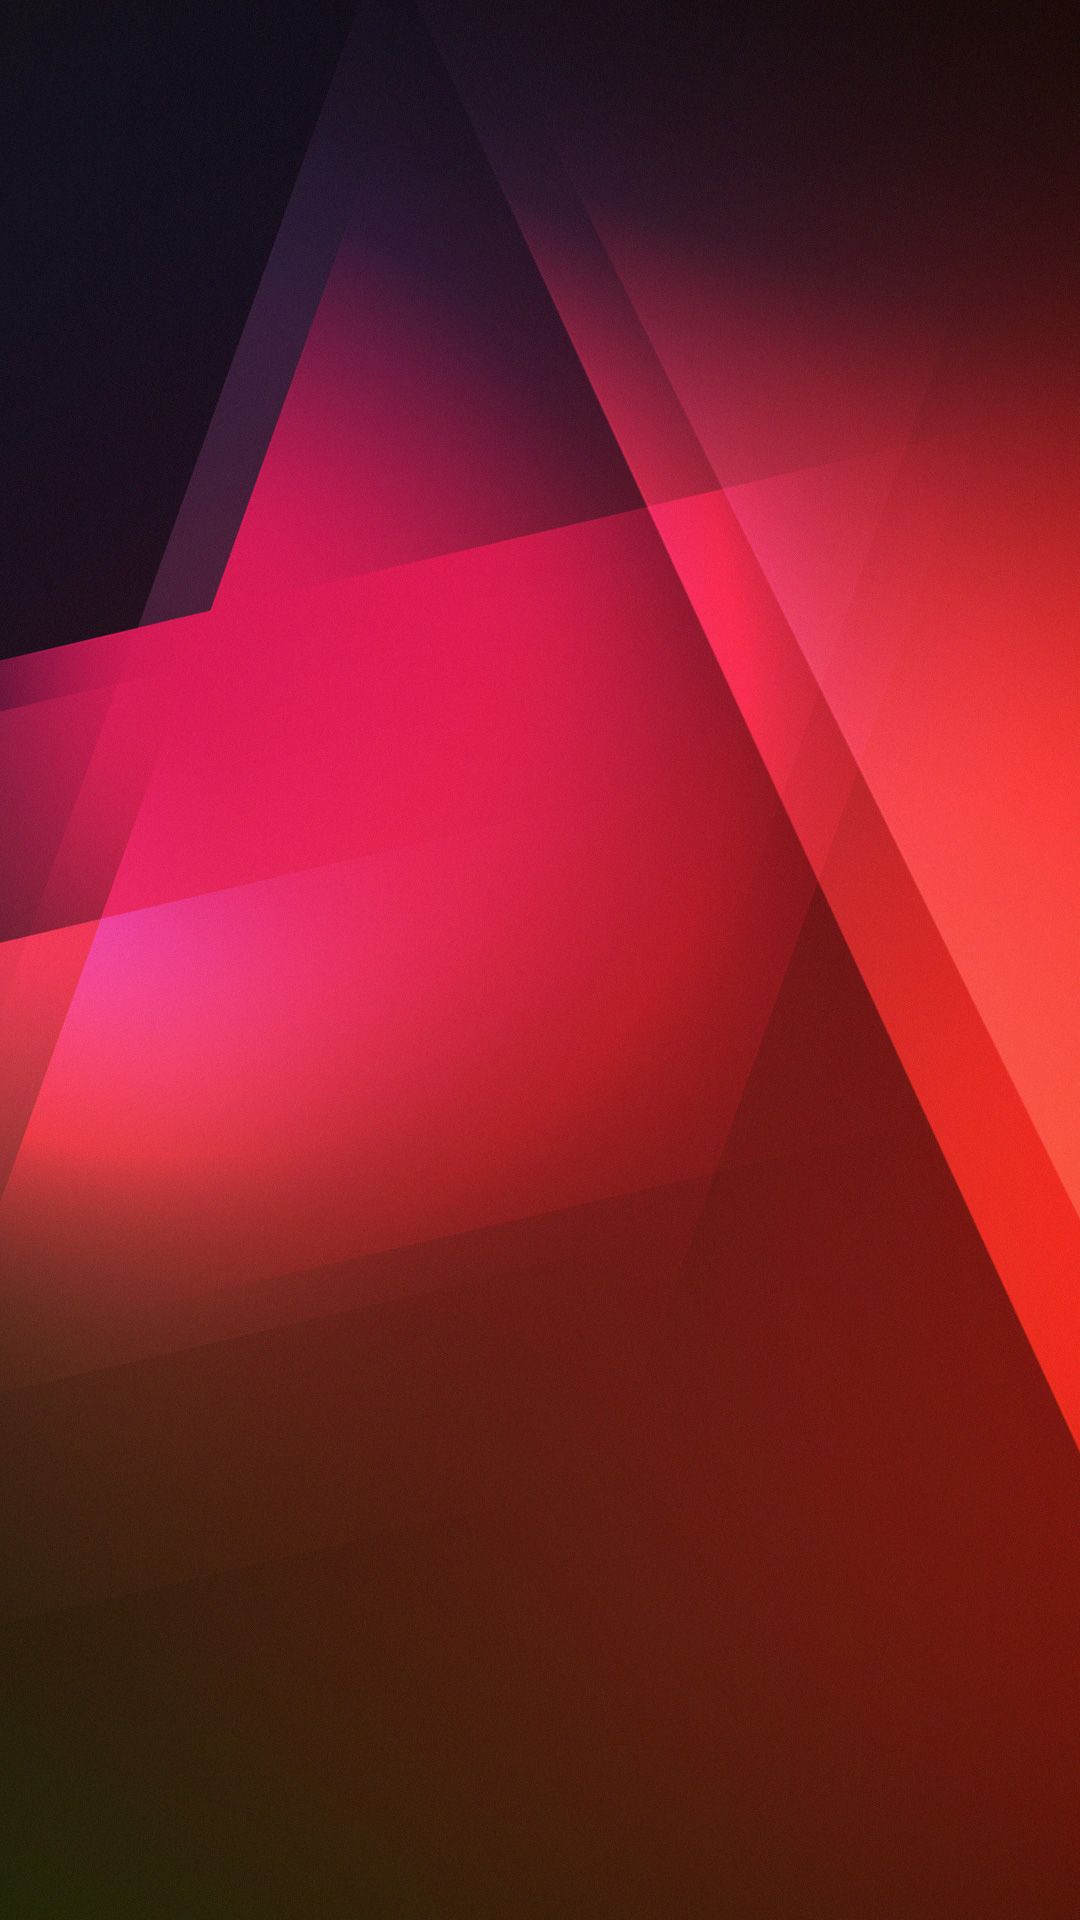 Abstract Geometric Red Background iPhone 6 wallpaper. Htc